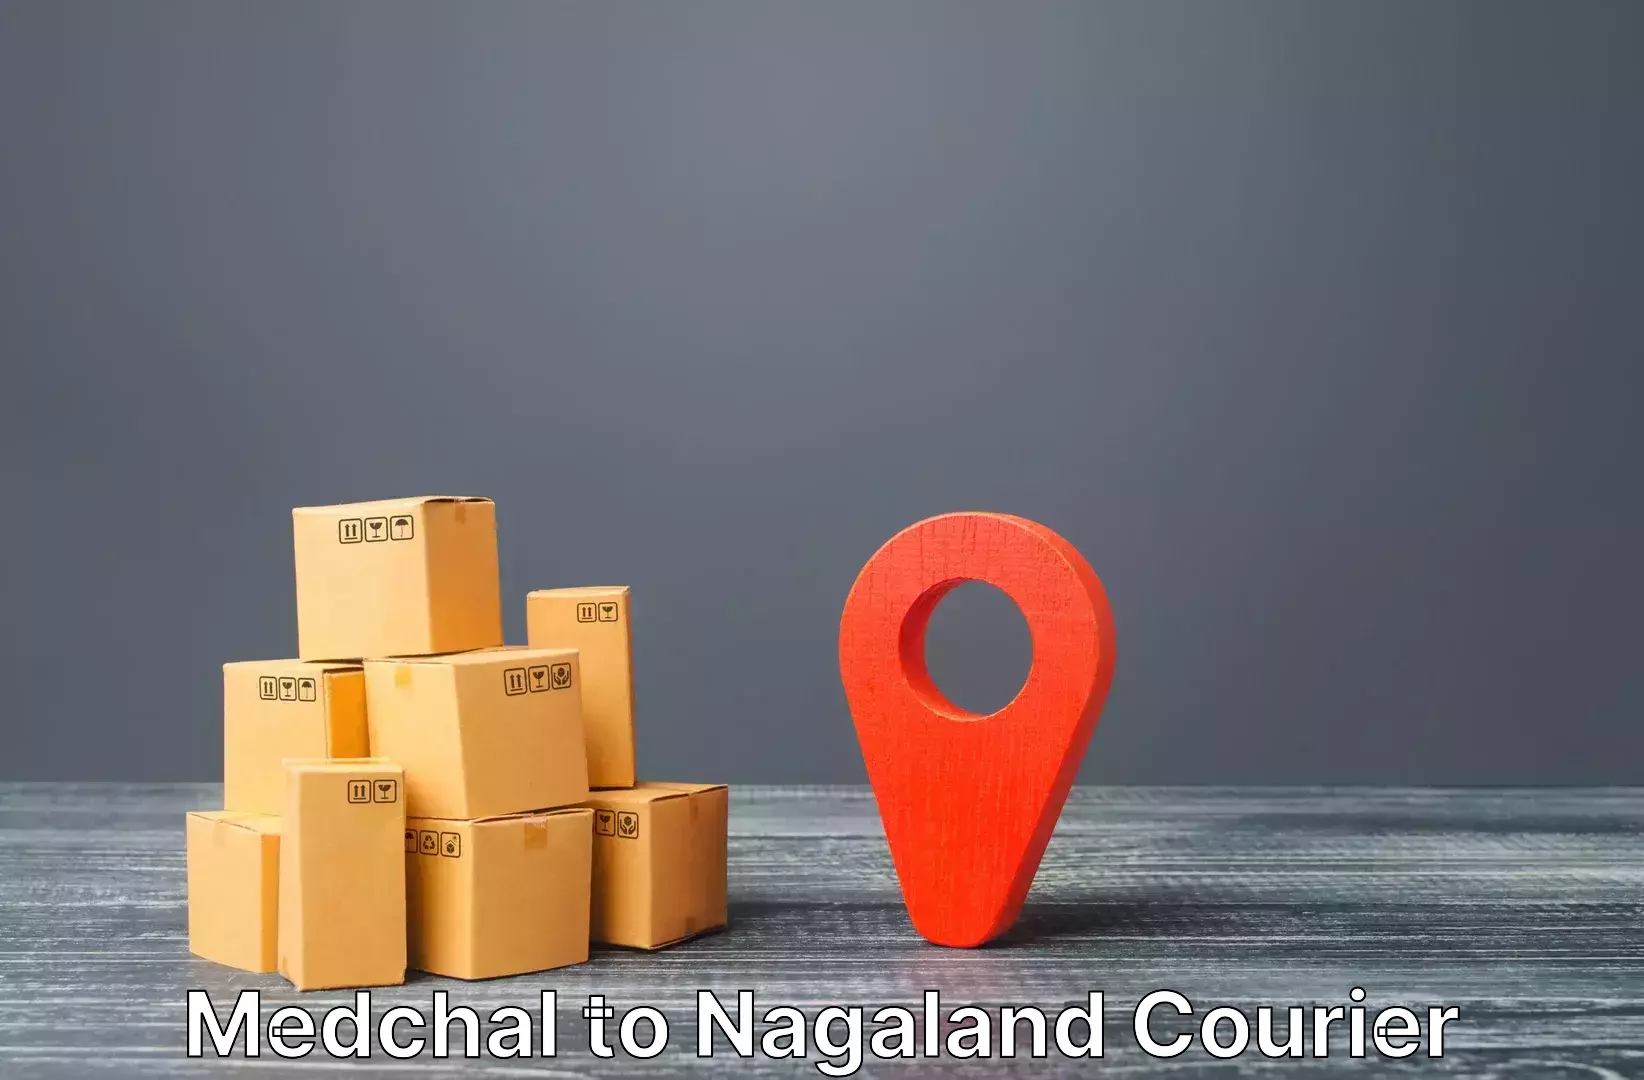 Luggage delivery network Medchal to Dimapur